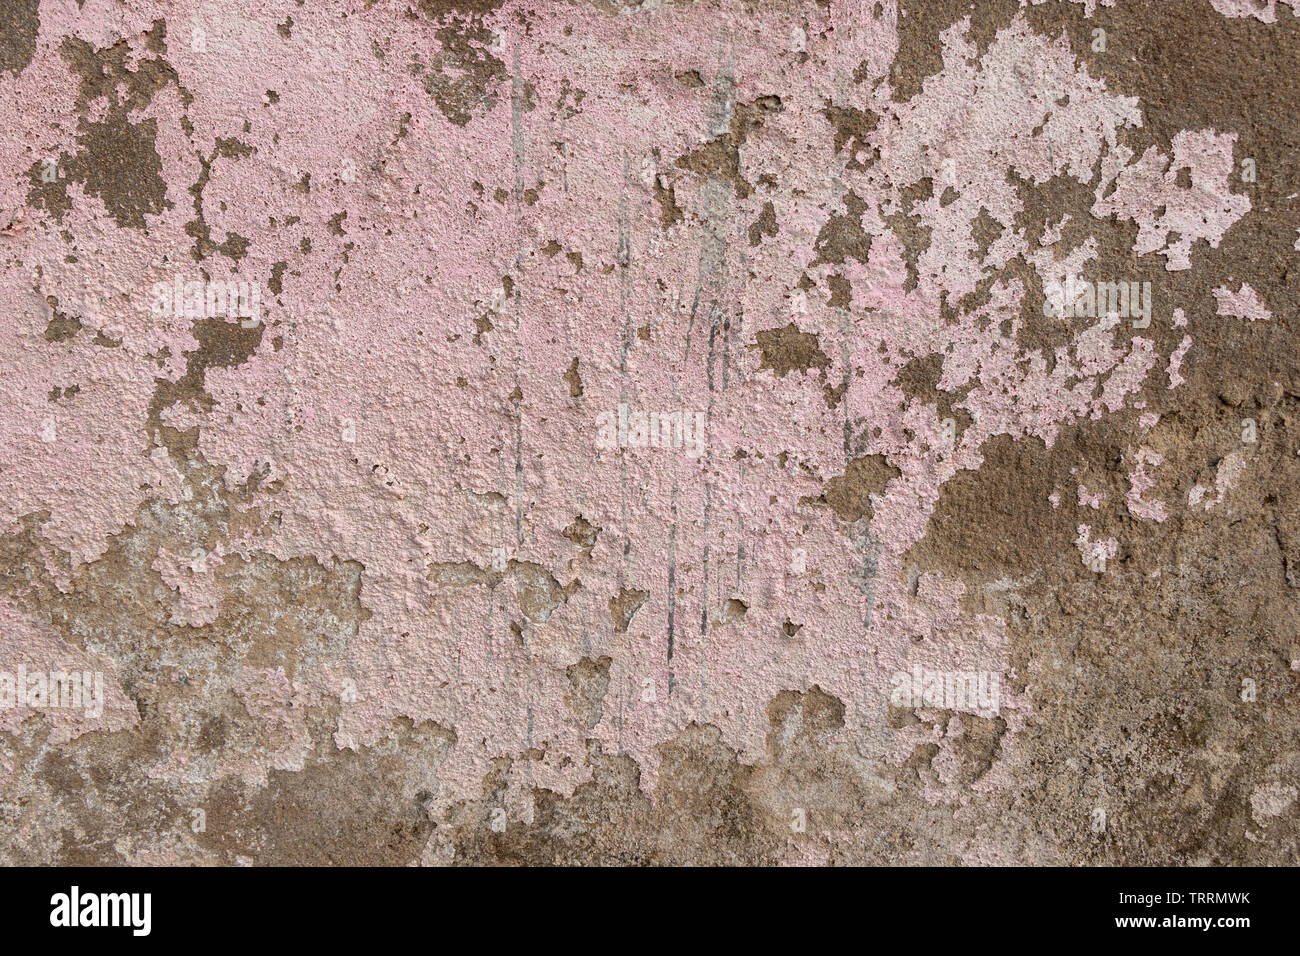 Concrete old wall plaster and paint peeled off due to mosture and aged, texture or background Stock Photo